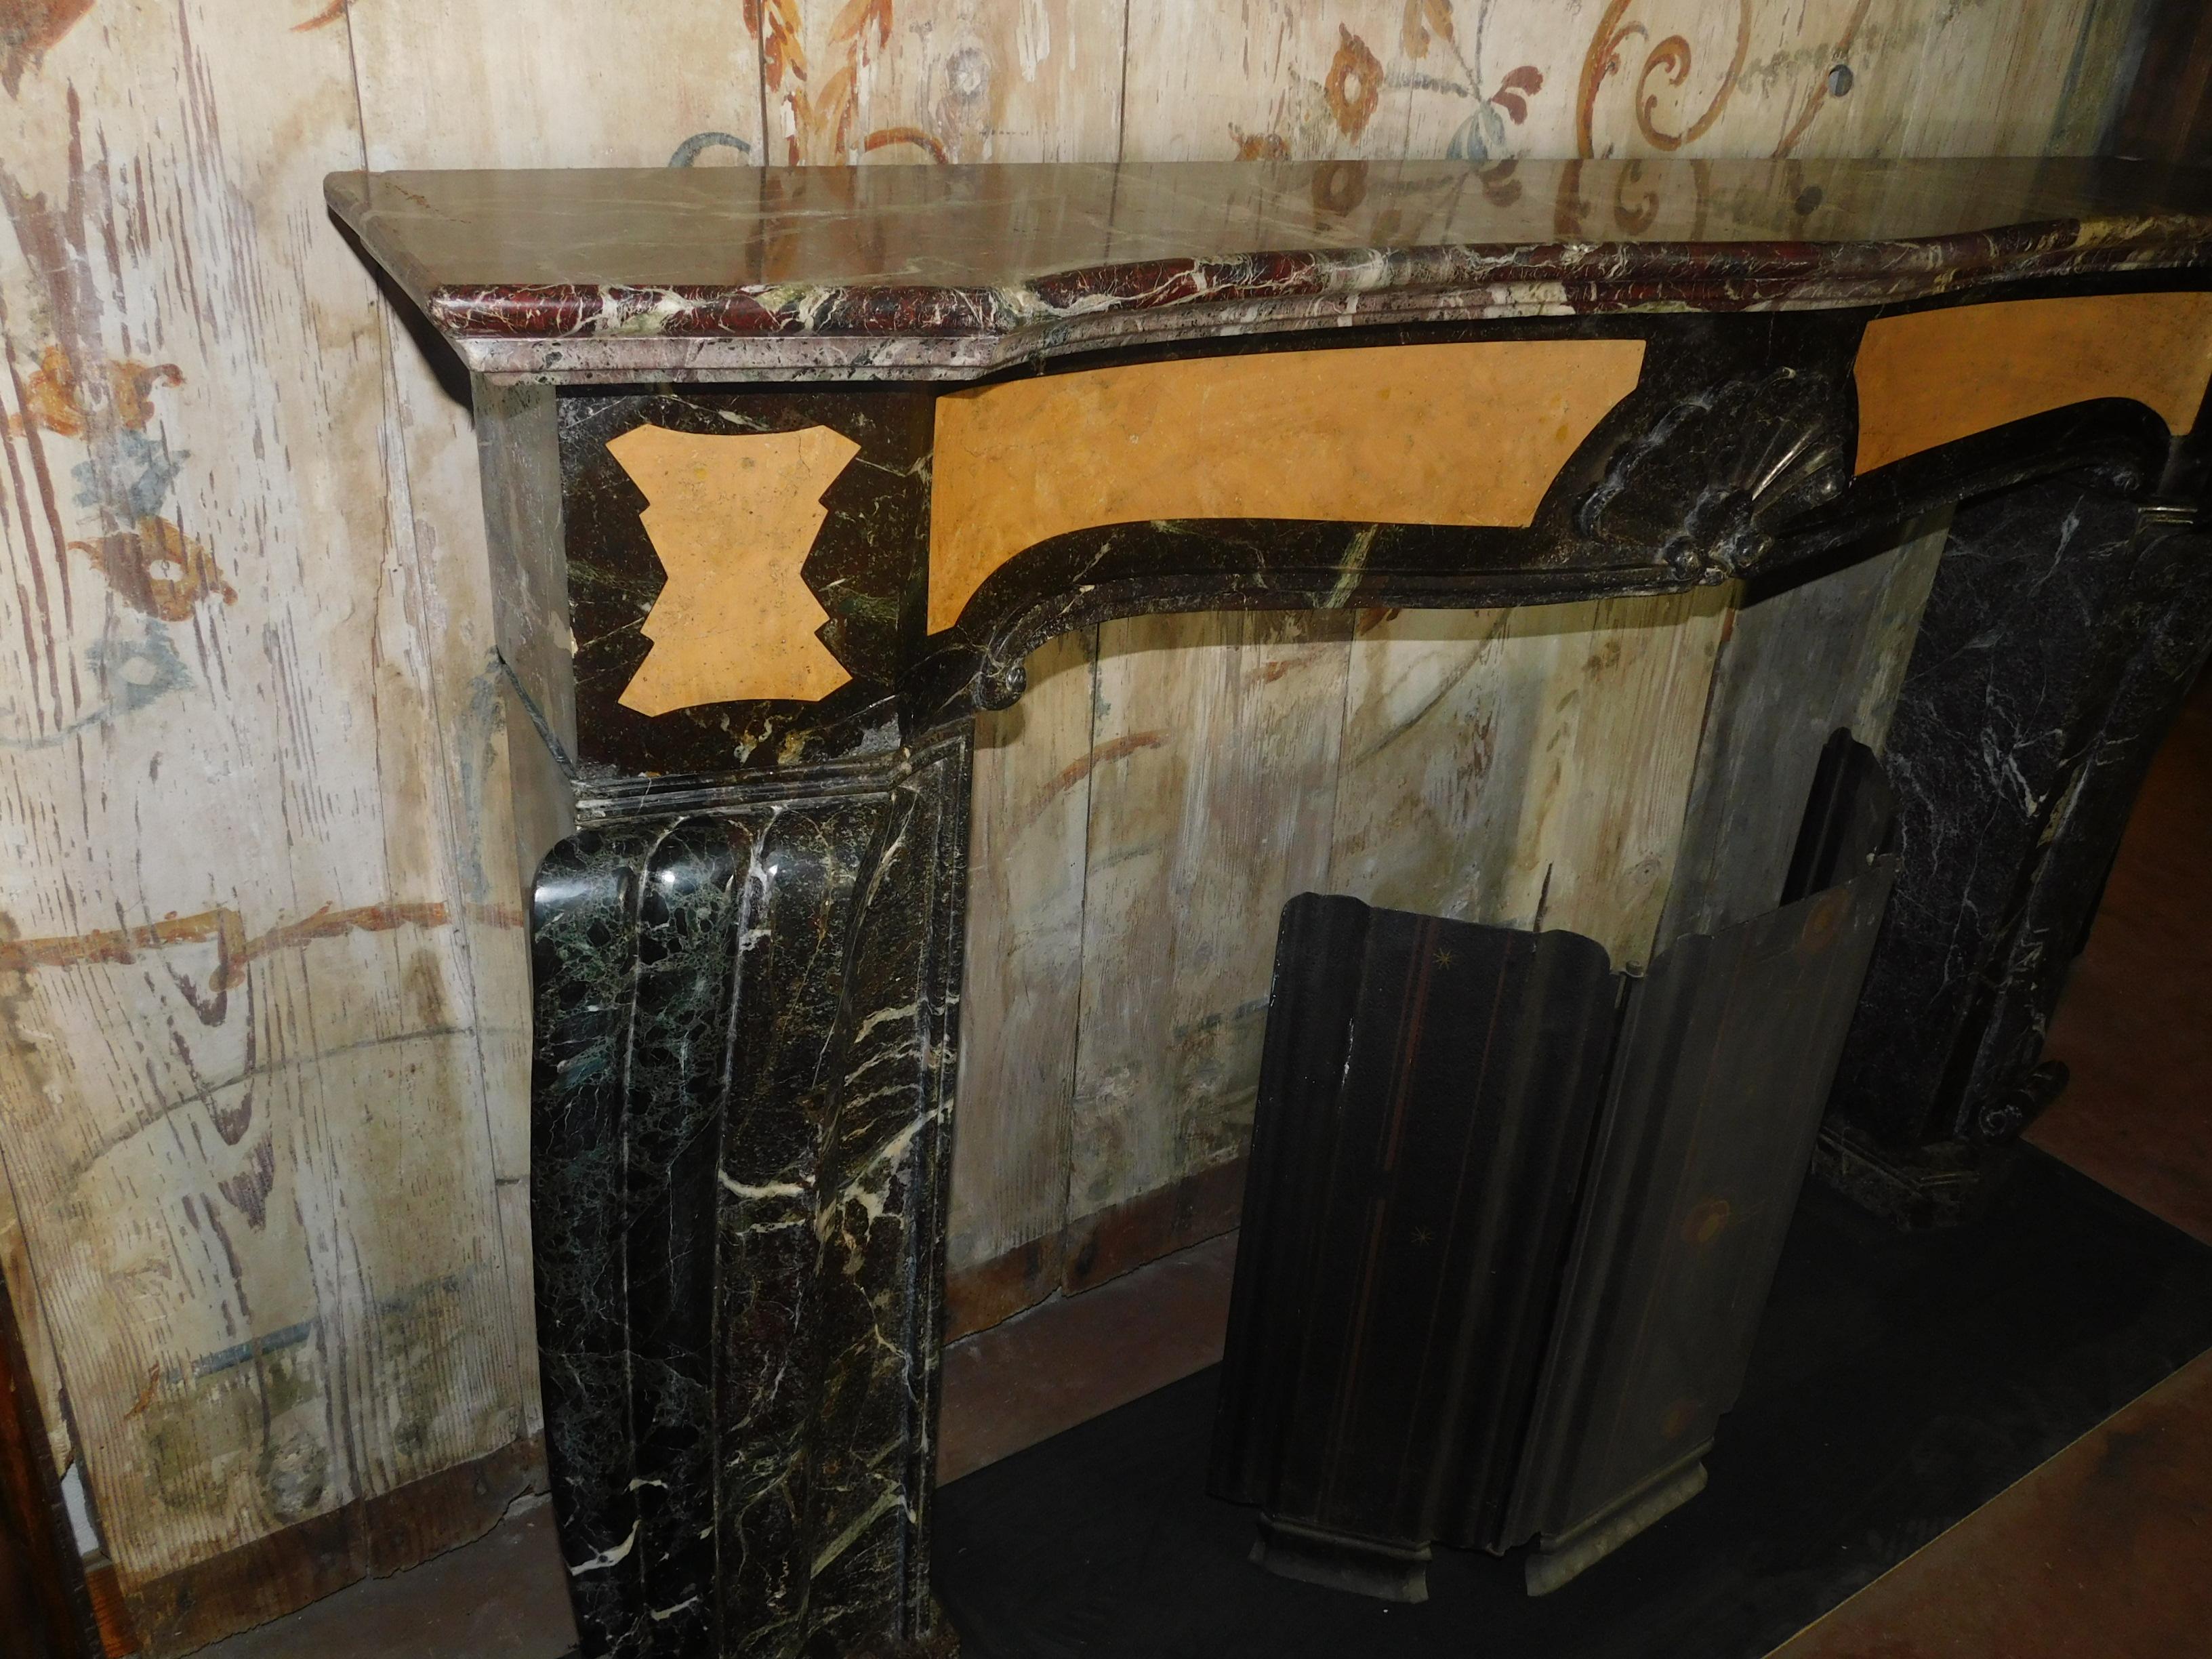 Antique and precious deco fireplace, composed of red (levanto) and yellow (siena) marble inlaid with geometric designs, wavy legs and pediment, well sculpted and ground. Composed of precious and rare marbles, which change yield and color based on